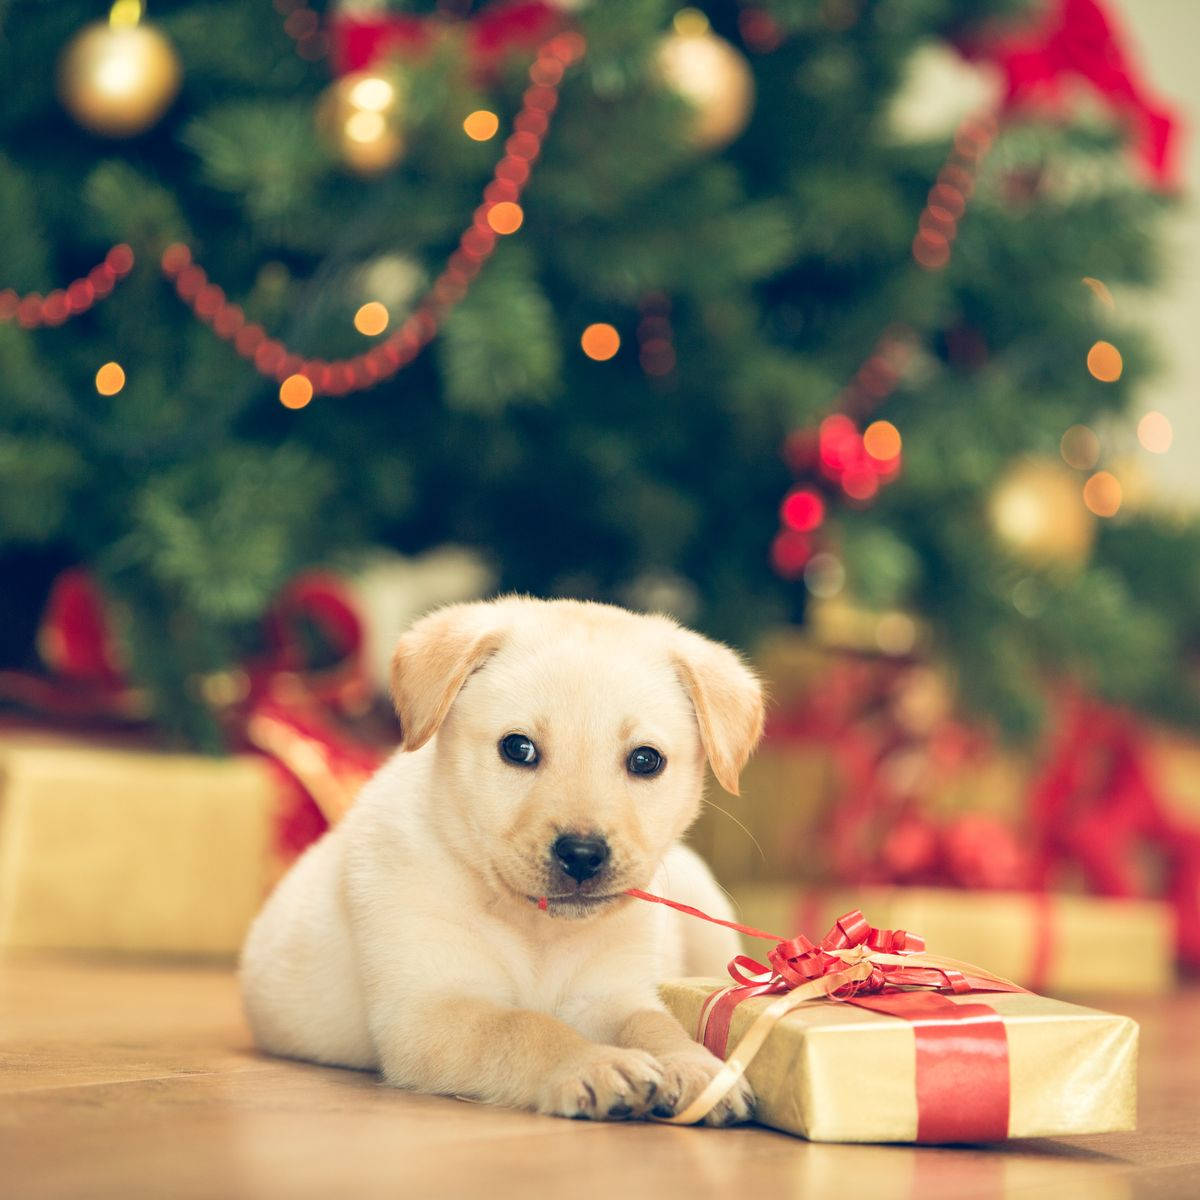 Puppy And Christmas Present Wallpaper